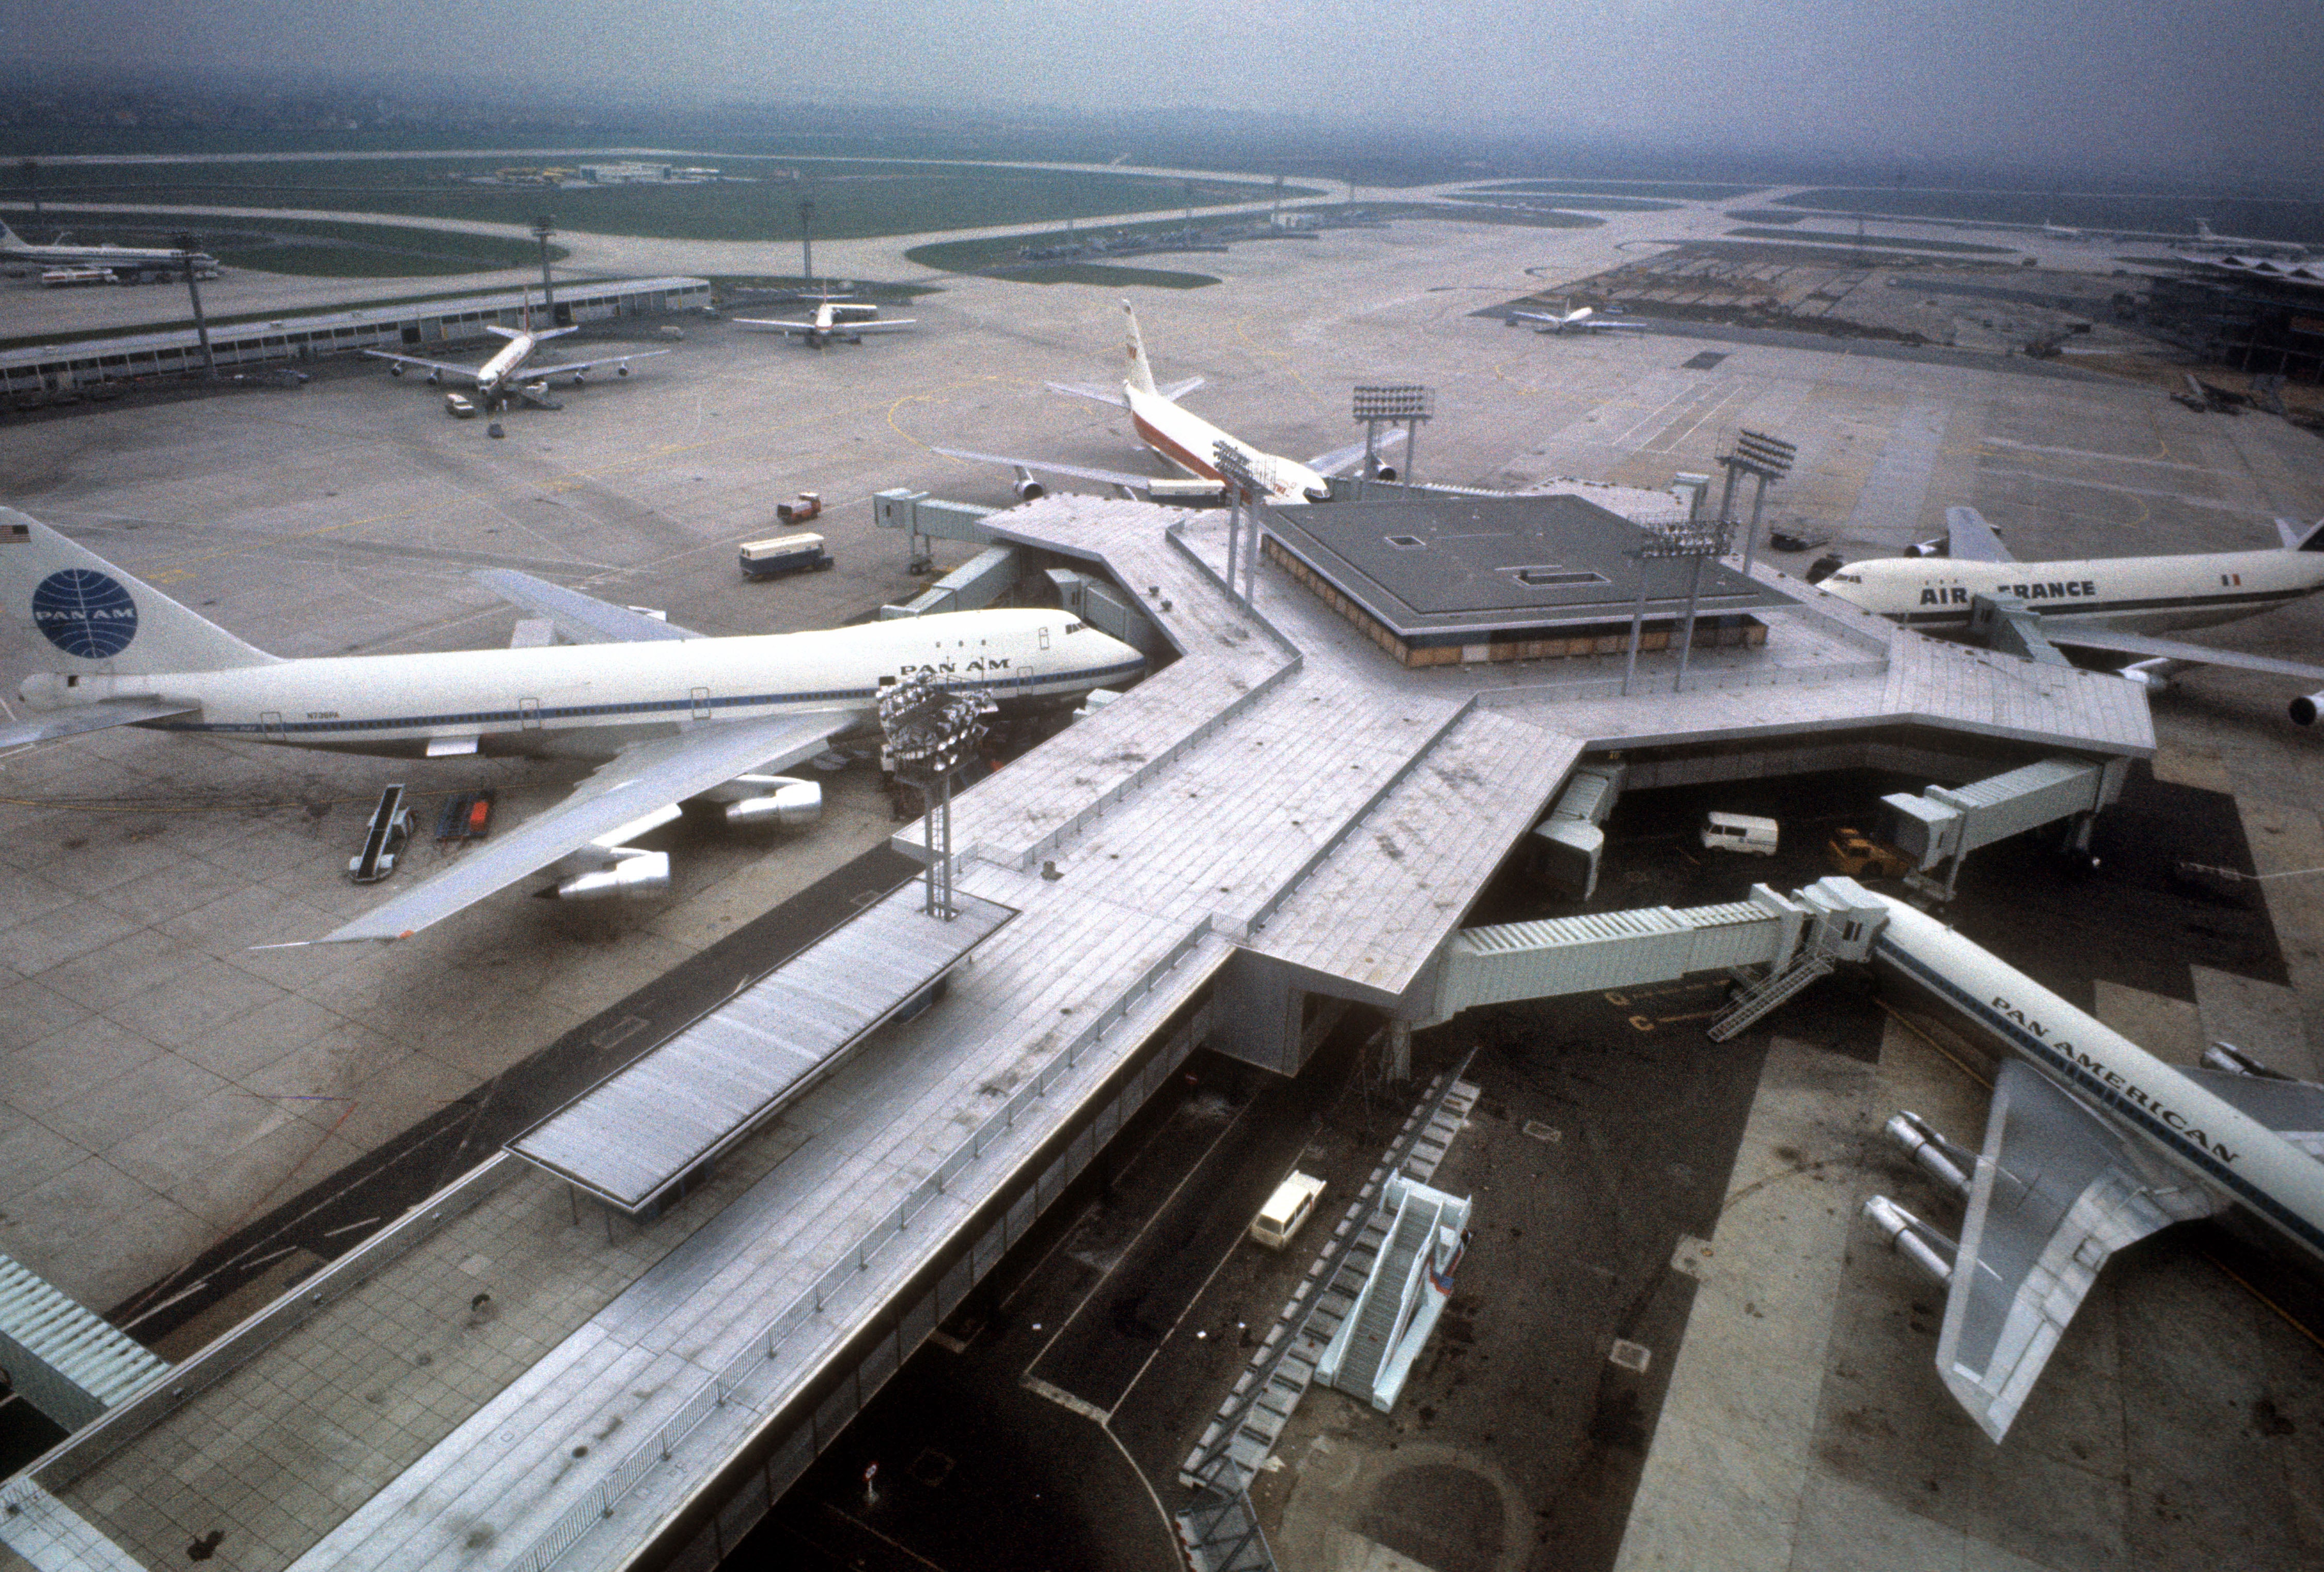 Boeing 747 airplanes at Orly’s airport in France